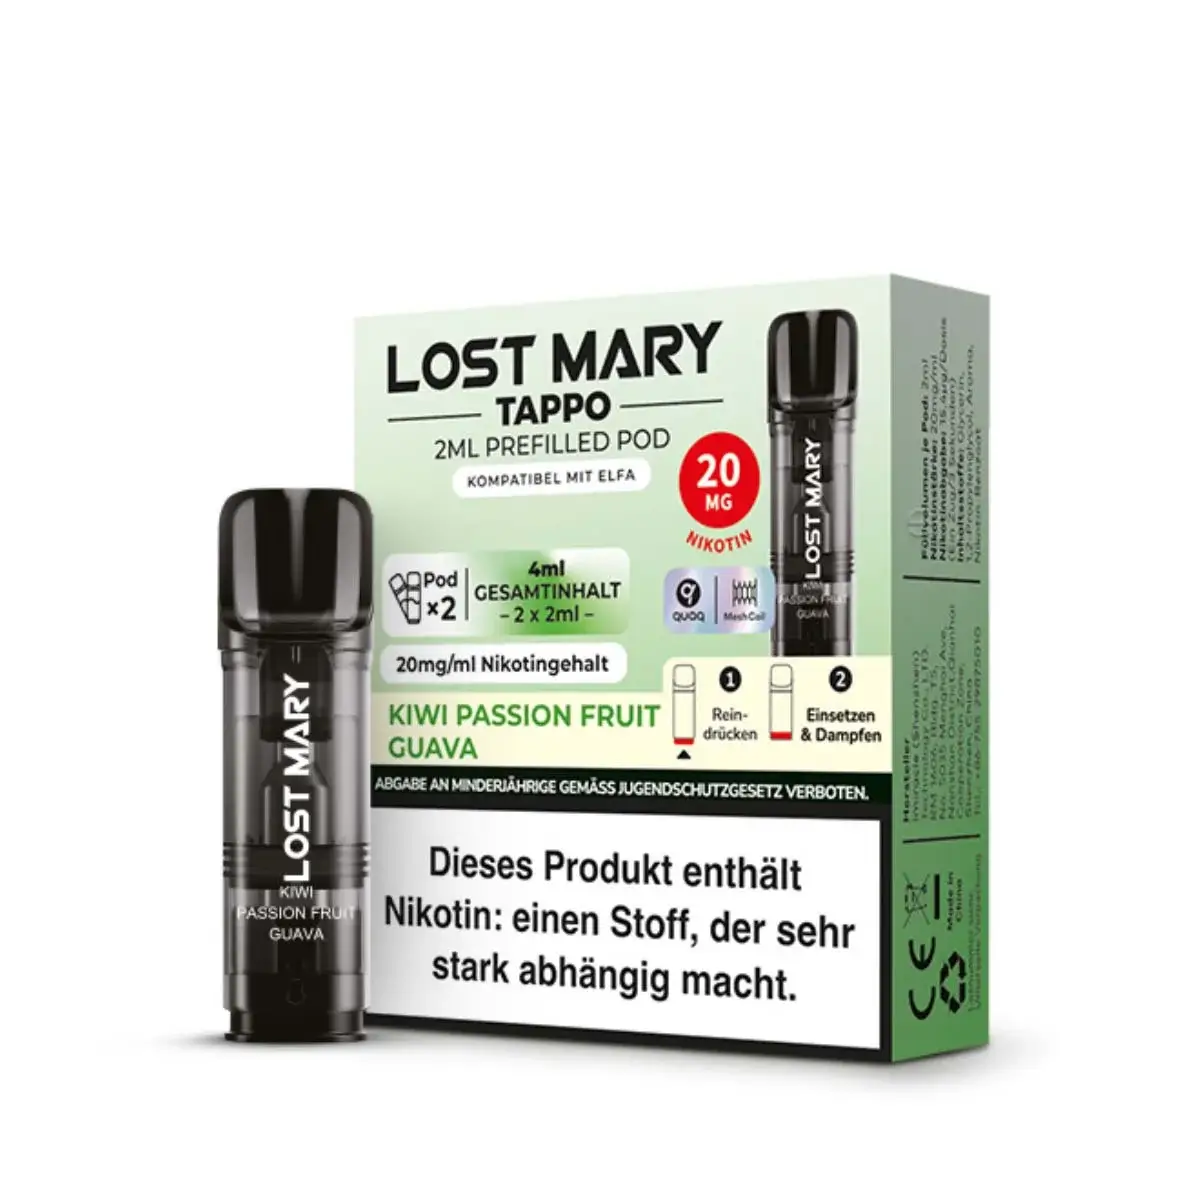 Lost Mary Tappo Pods Kiwi Passion Fruit Guava 20mg 2er Pack